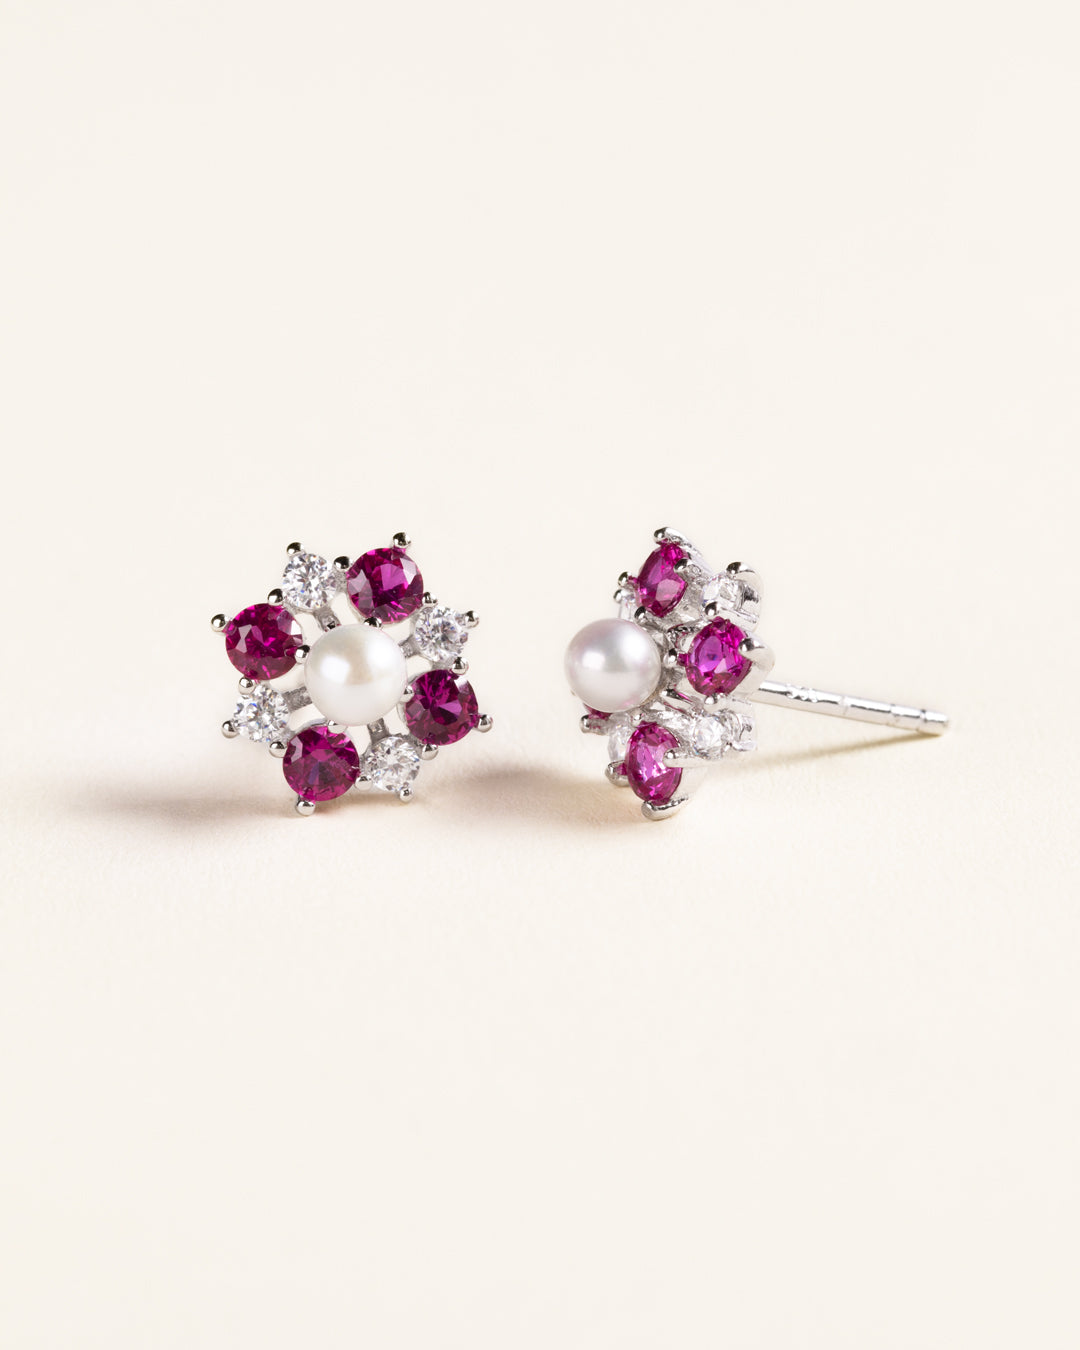 925 SILVER FLOWER EARRINGS WITH PEARLS AND FUCHSIA CRYSTALS